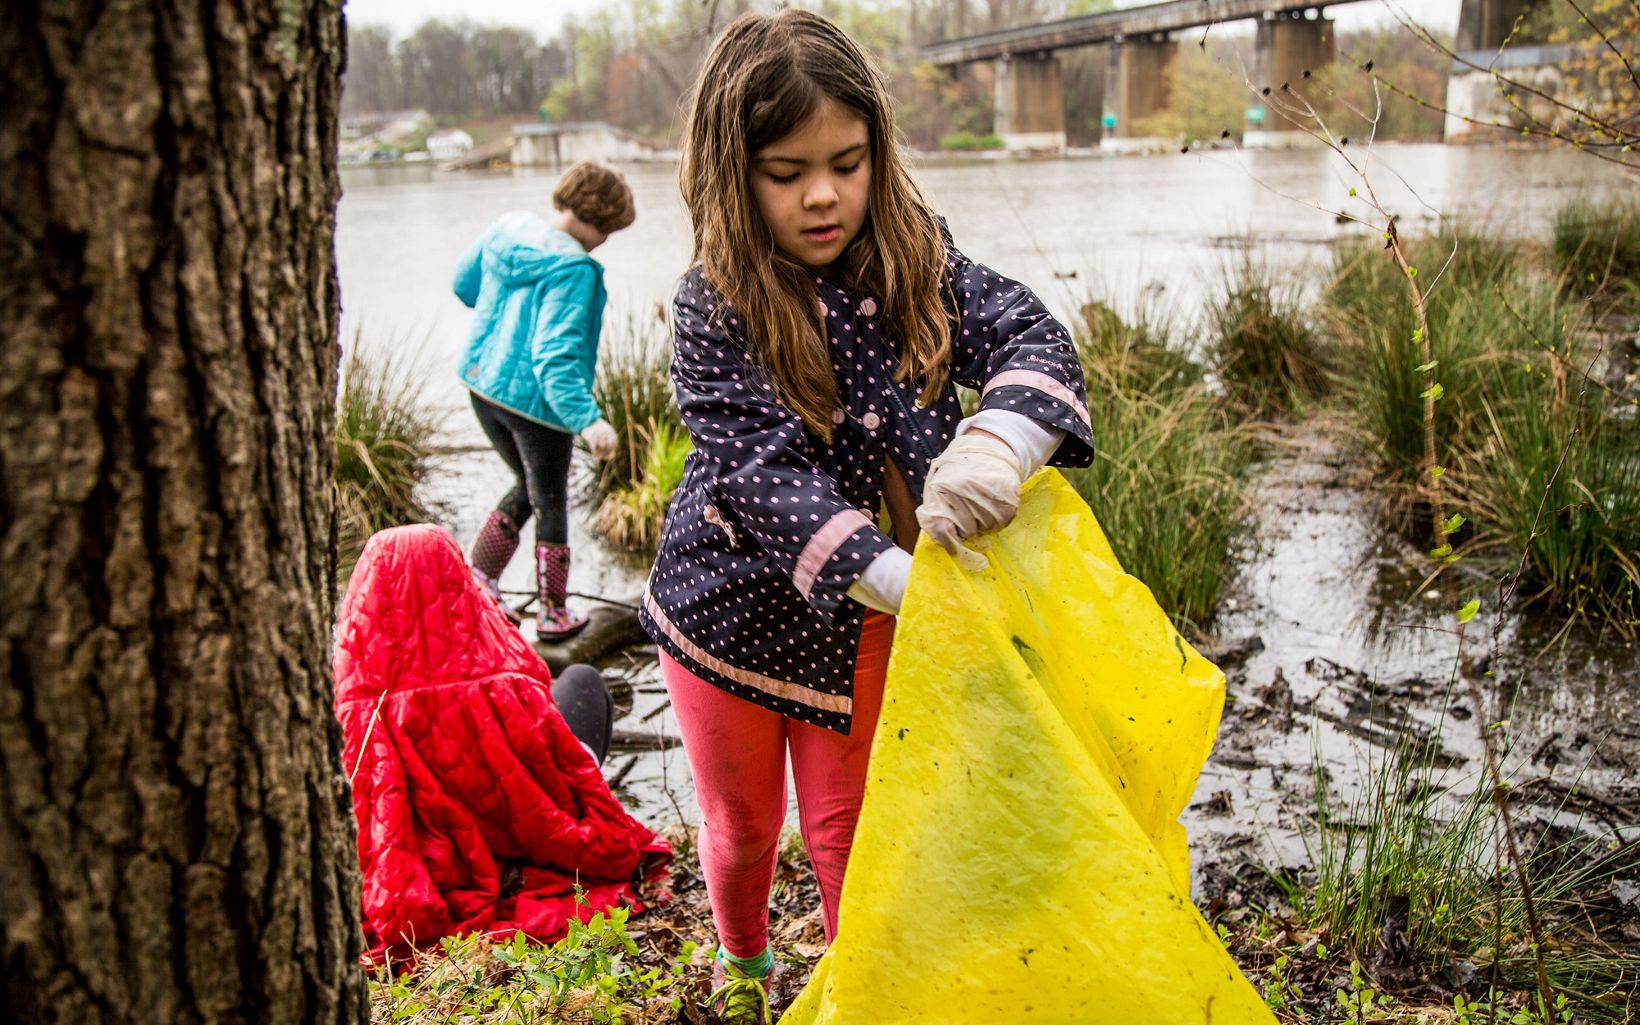 A young girl wearing a navy blue and pink polka dotted rain coat puts trash in a large yellow bag.